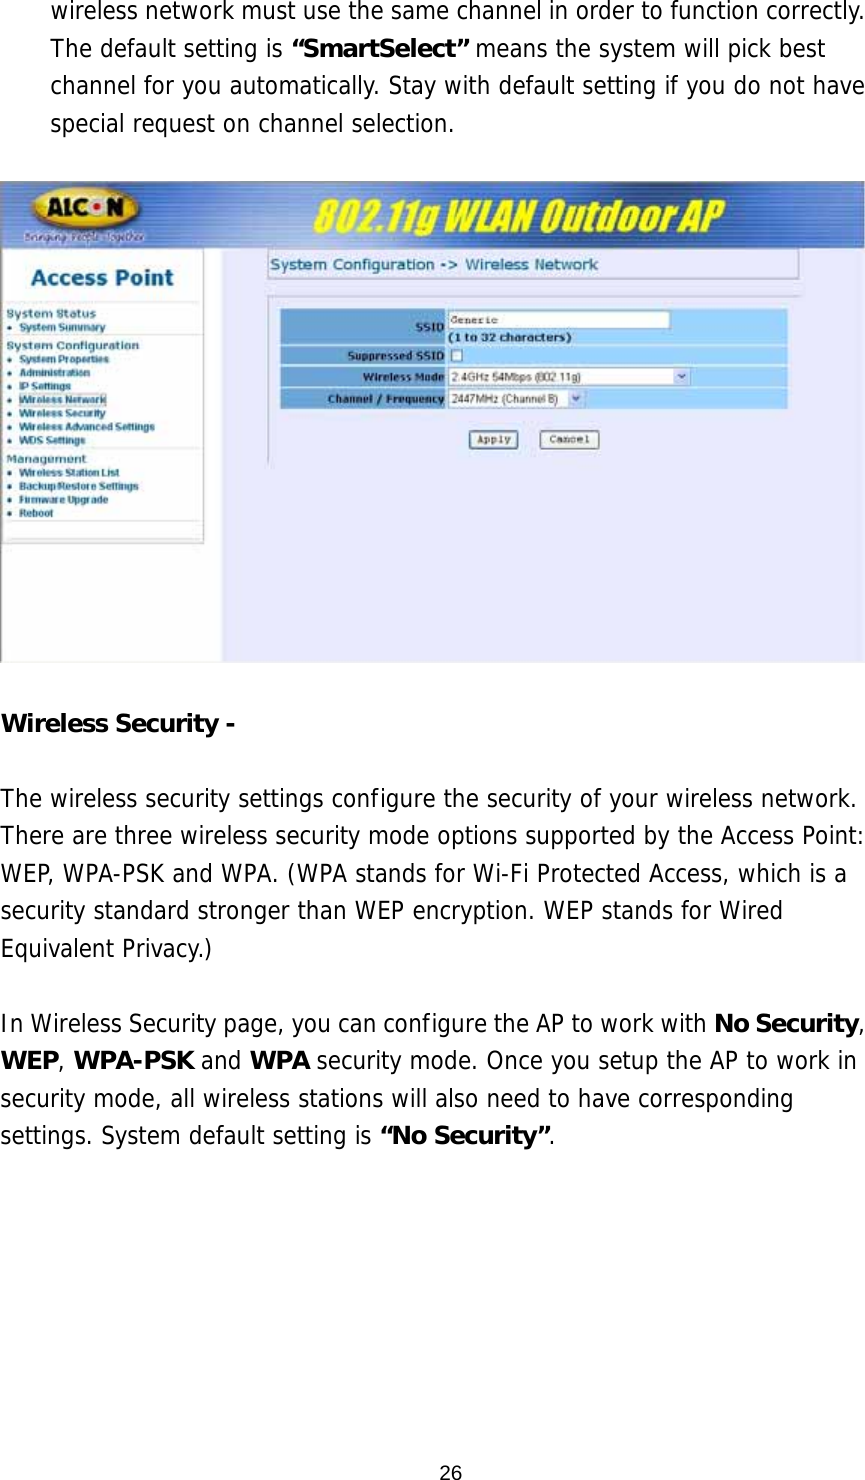 wireless network must use the same channel in order to function correctly. The default setting is “SmartSelect” means the system will pick best channel for you automatically. Stay with default setting if you do not have special request on channel selection.    Wireless Security -    The wireless security settings configure the security of your wireless network. There are three wireless security mode options supported by the Access Point: WEP, WPA-PSK and WPA. (WPA stands for Wi-Fi Protected Access, which is a security standard stronger than WEP encryption. WEP stands for Wired Equivalent Privacy.)   In Wireless Security page, you can configure the AP to work with No Security, WEP, WPA-PSK and WPA security mode. Once you setup the AP to work in security mode, all wireless stations will also need to have corresponding settings. System default setting is “No Security”.   26